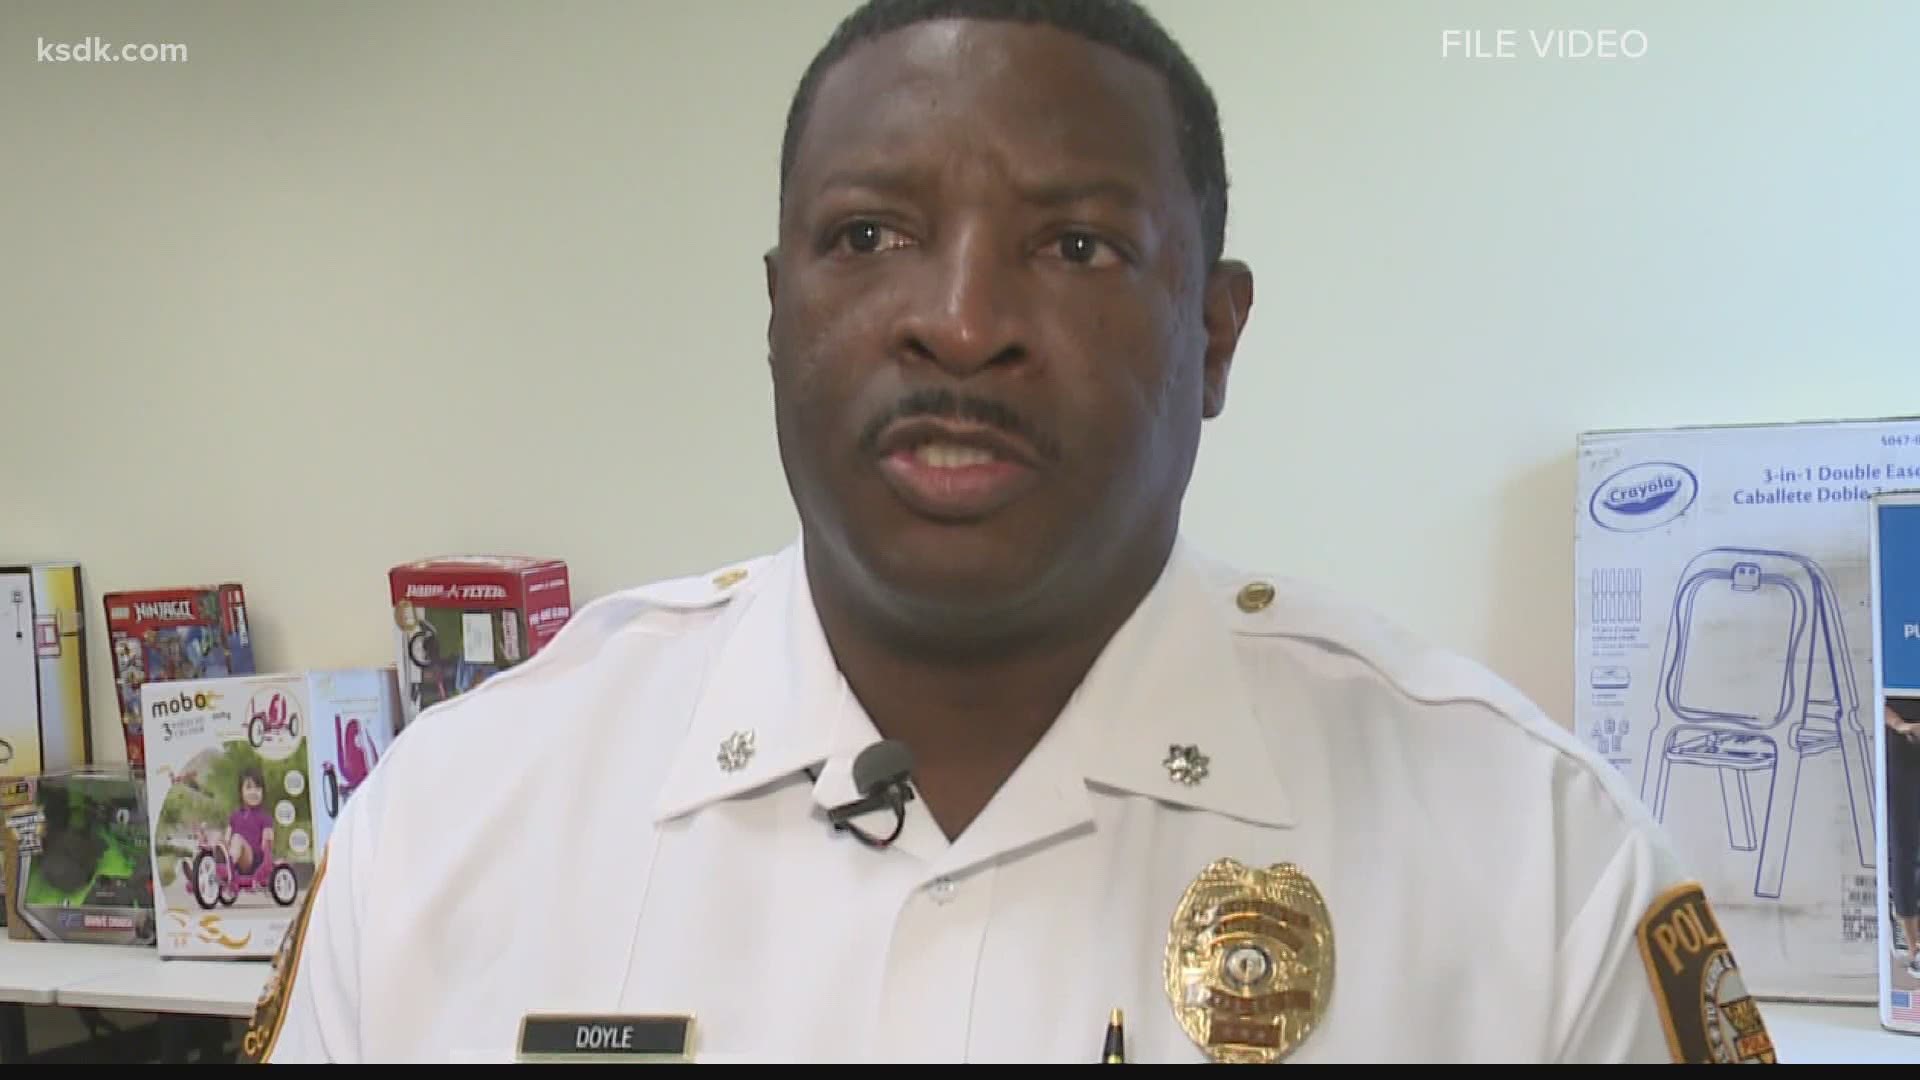 Lt. Col. Troy Doyle filed complaint with Equal Employment Opportunity Commission alleging he was passed over for police chief because he is Black.